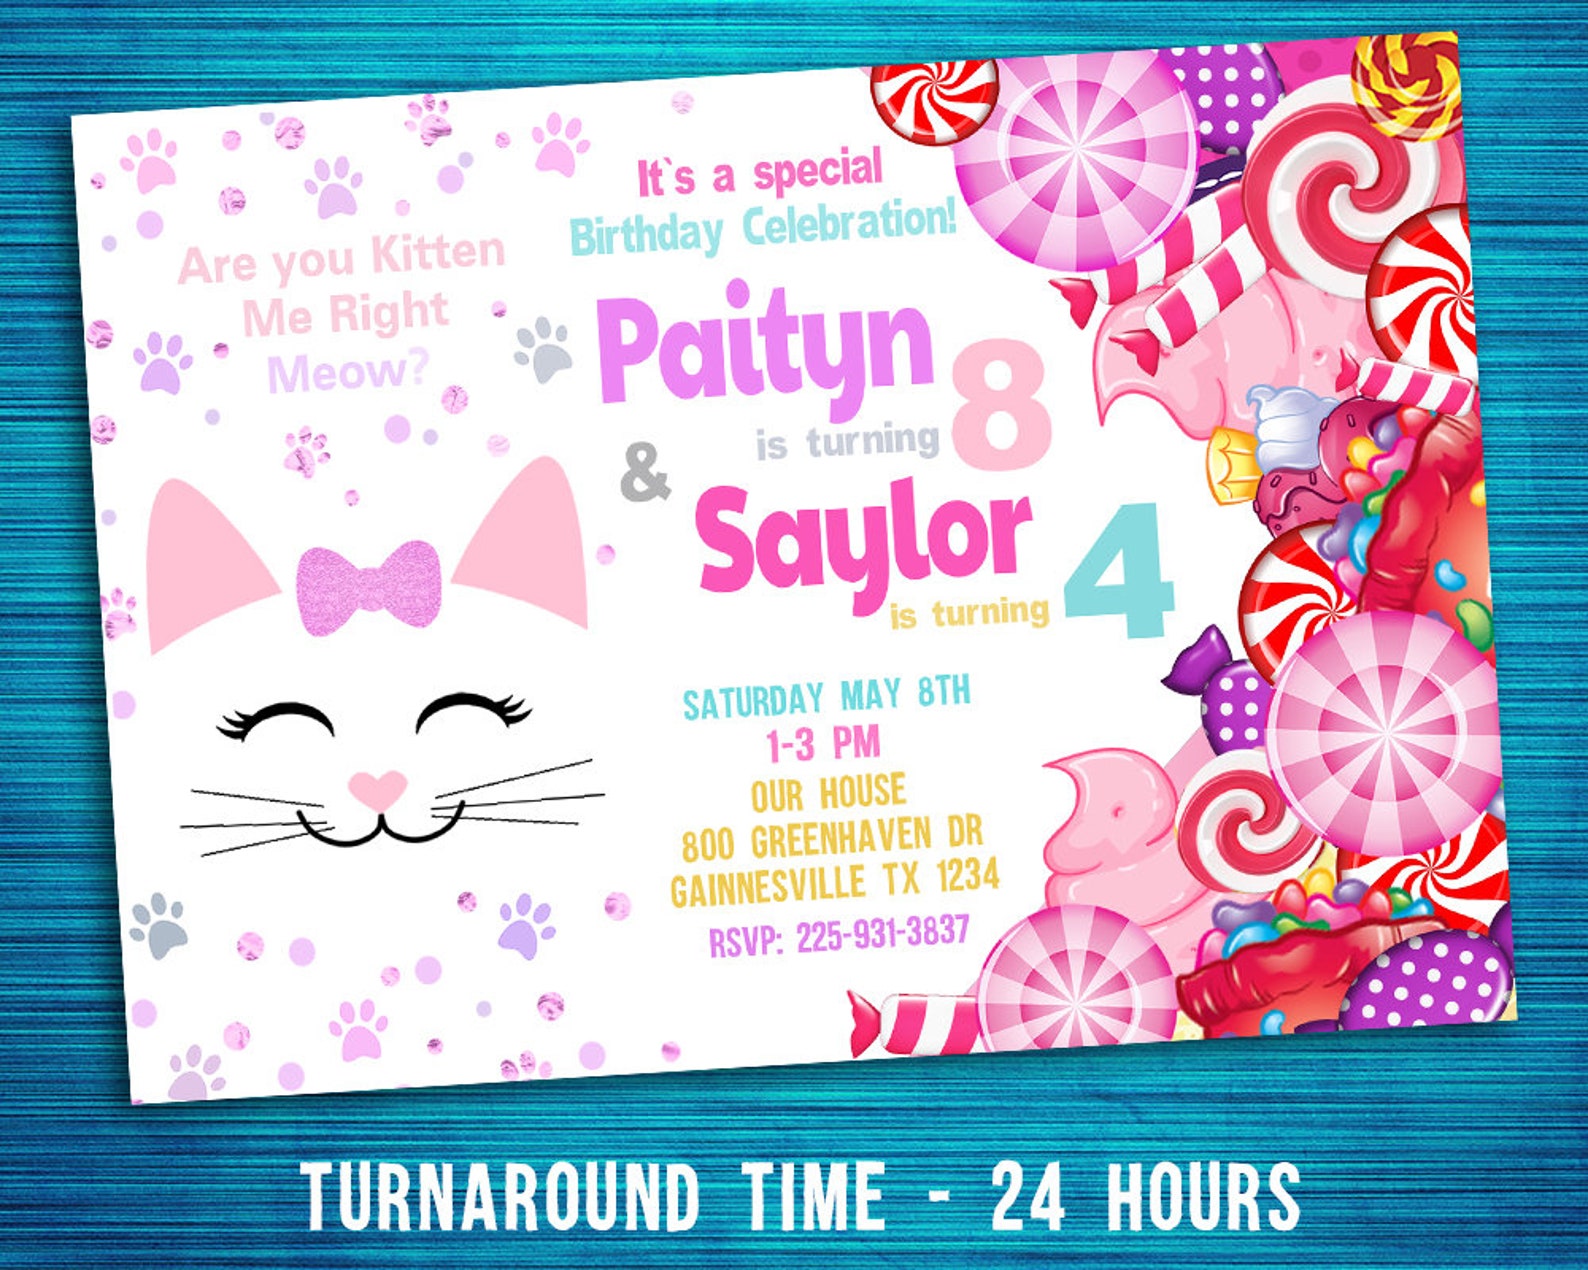 double-birthday-invitation-are-you-kitten-me-right-meow-etsy